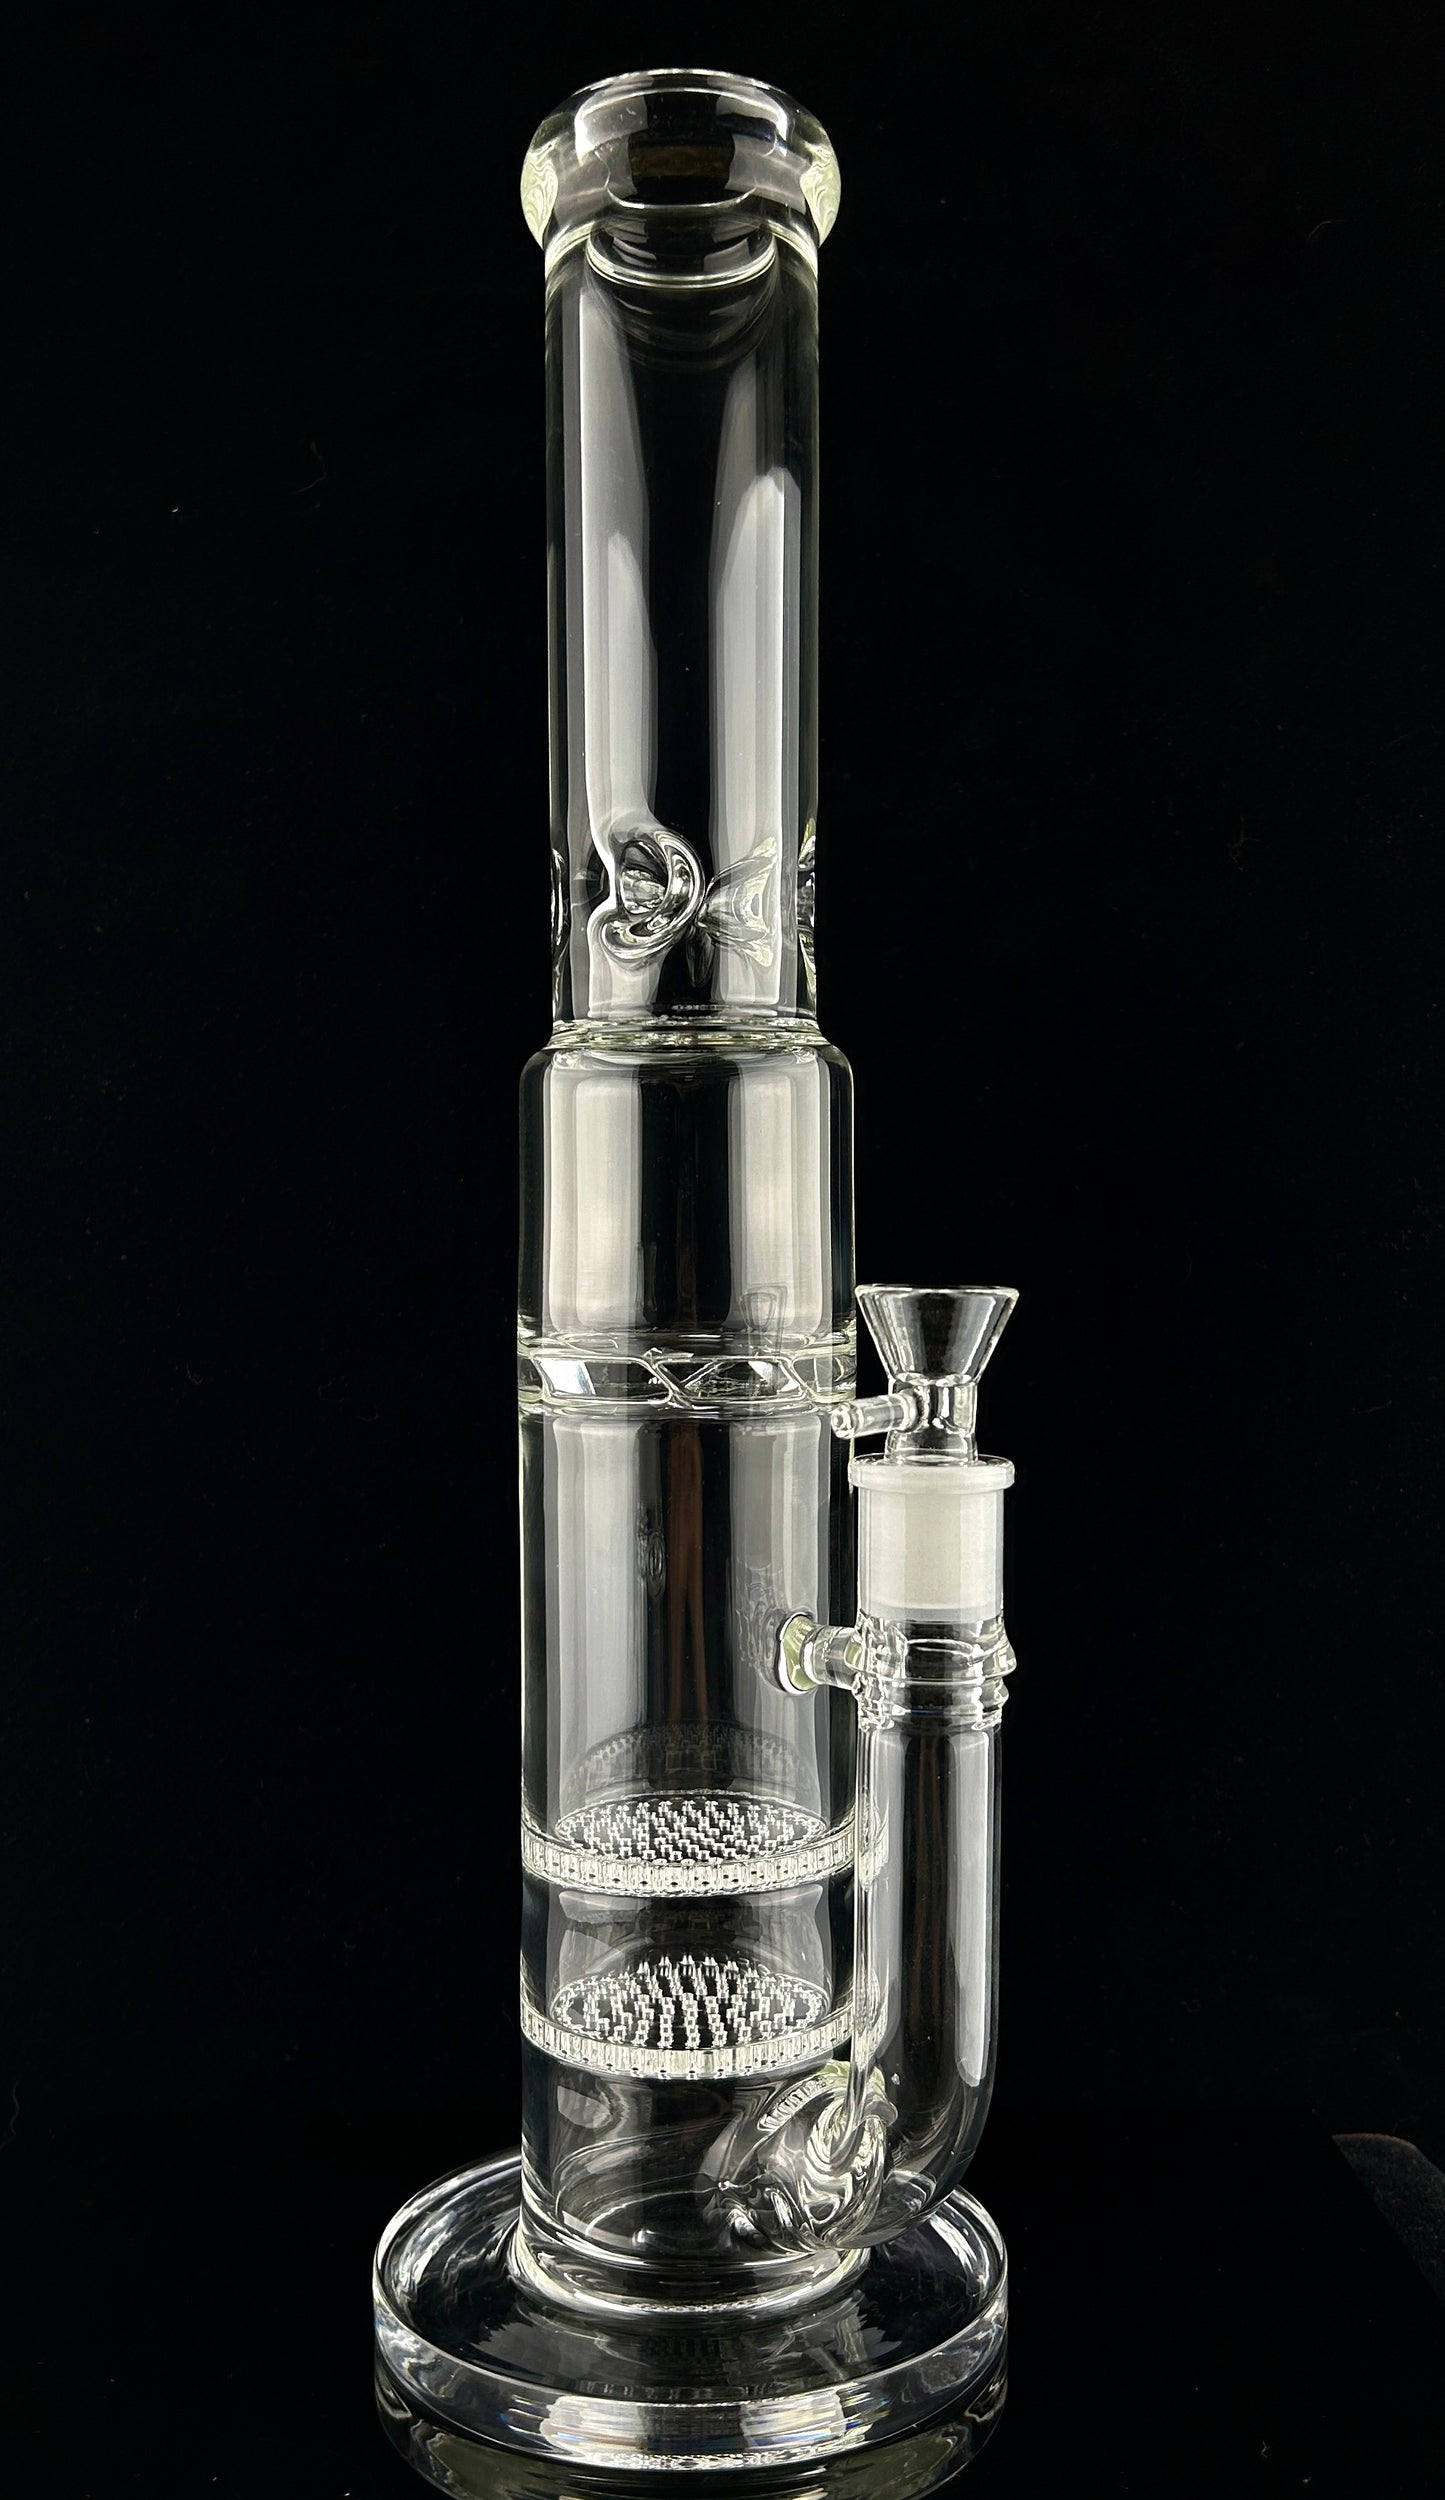 16" Tube with Dual Honeycomb Disk Percs and Turbine